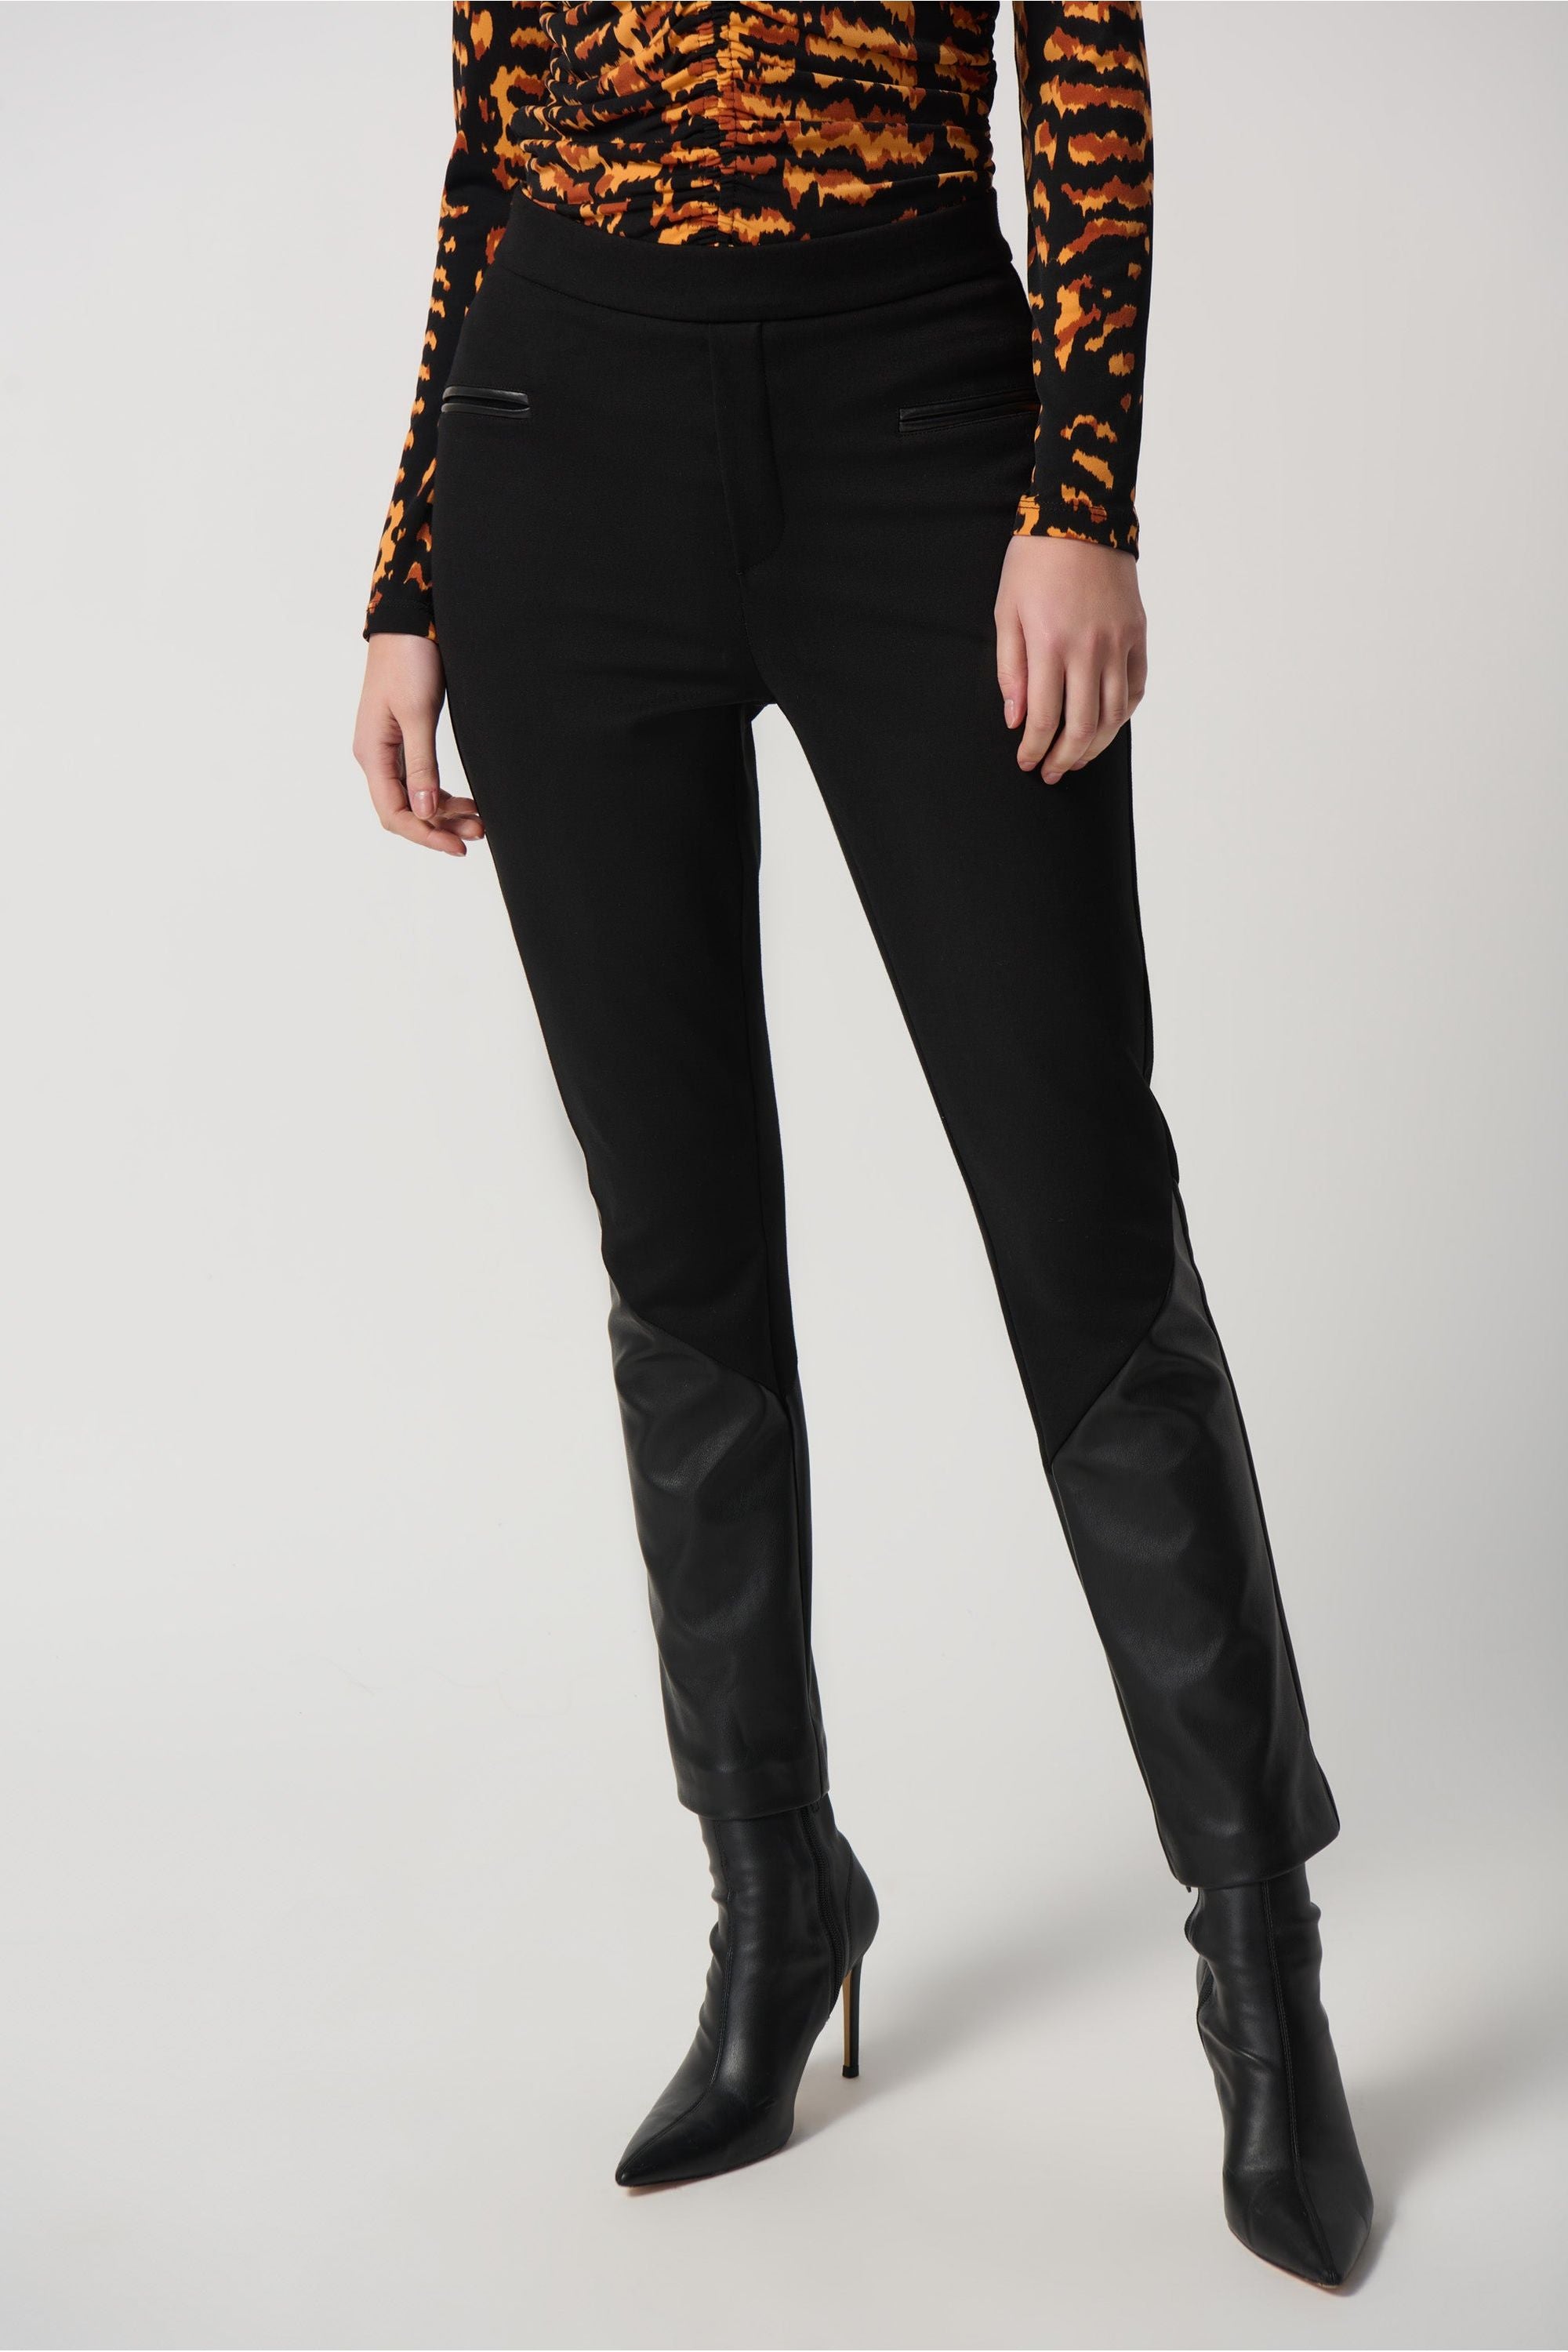 Joseph Ribkoff Heavy Knit and Faux Leather Pants - Style 234036